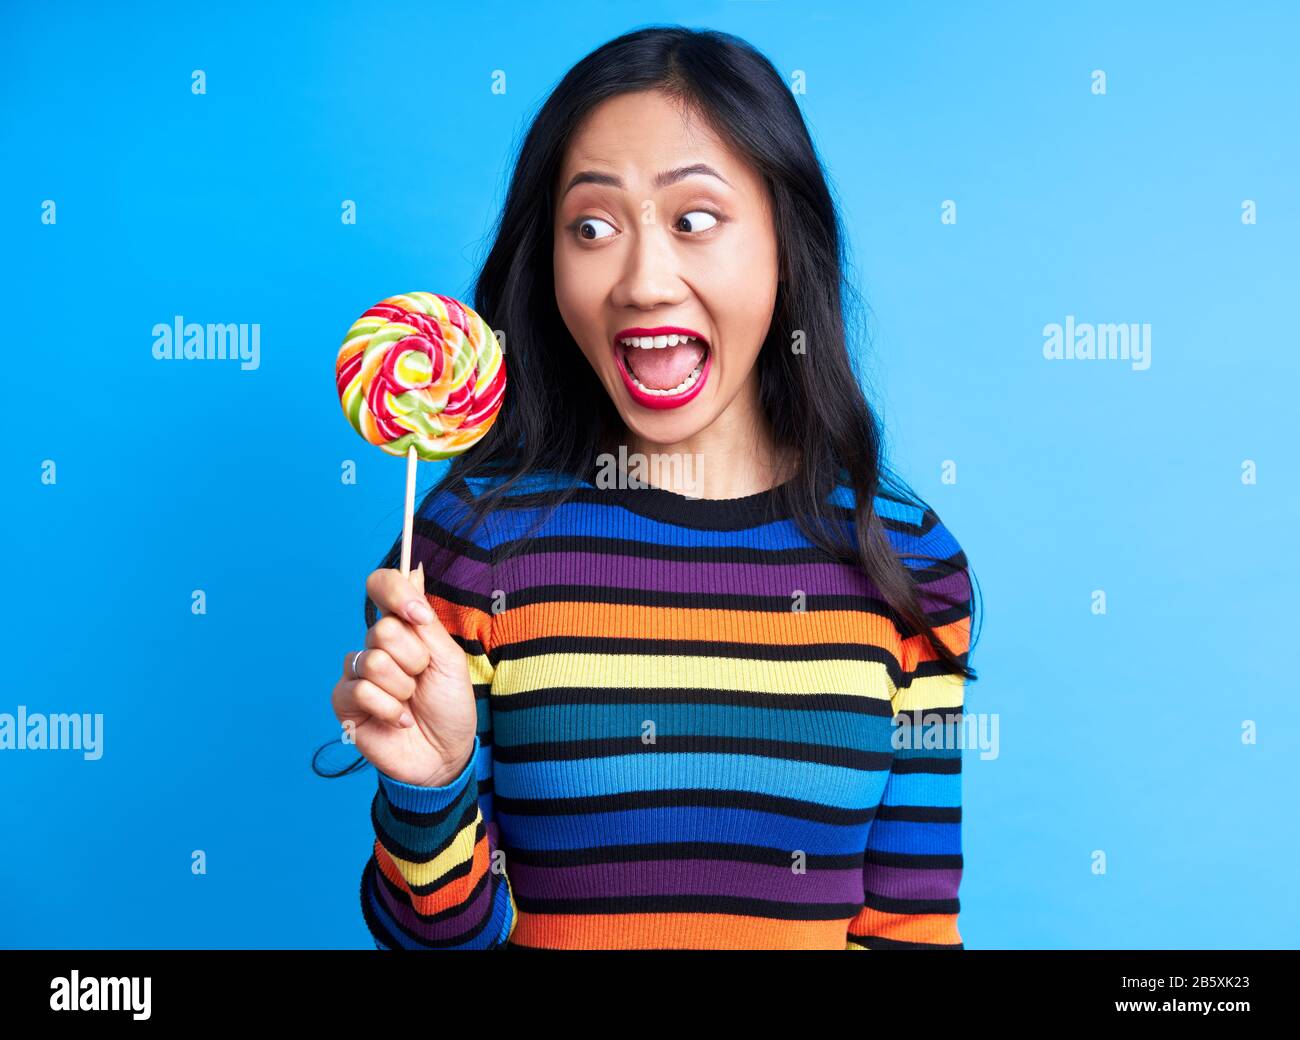 Hungry funny woman want to eat delicious colorful lollipop isolated  on blue background. Yummy, emotion concept, sweet food, diet Stock Photo